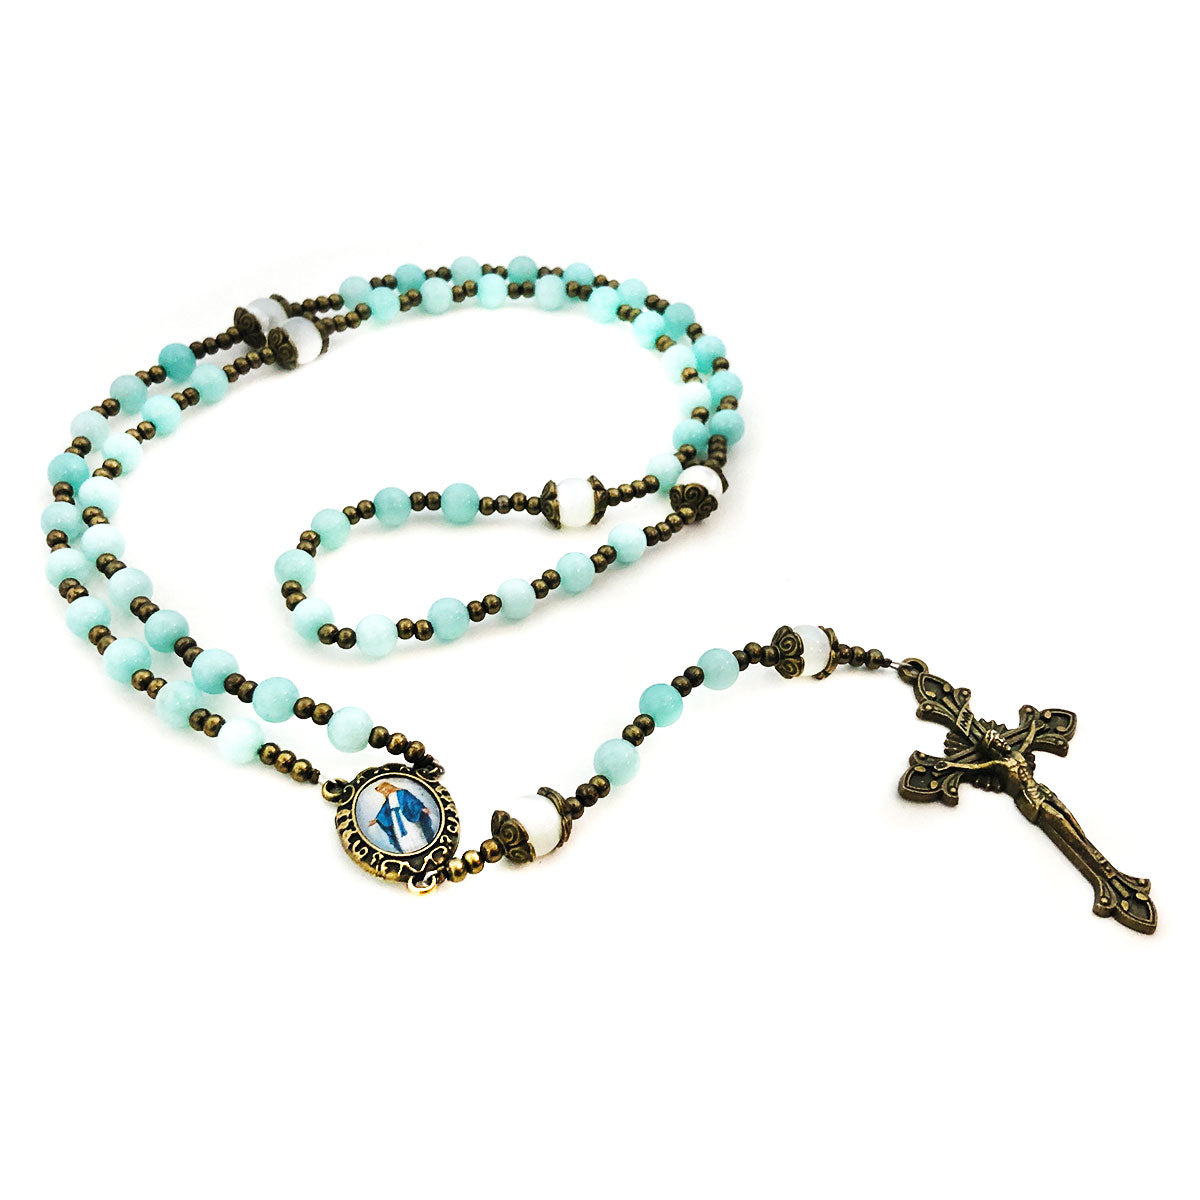 Catholic Heirlooms Our Lady Of Grace Blue Sponge Quartz and Mother of Pearl Stone Rosary